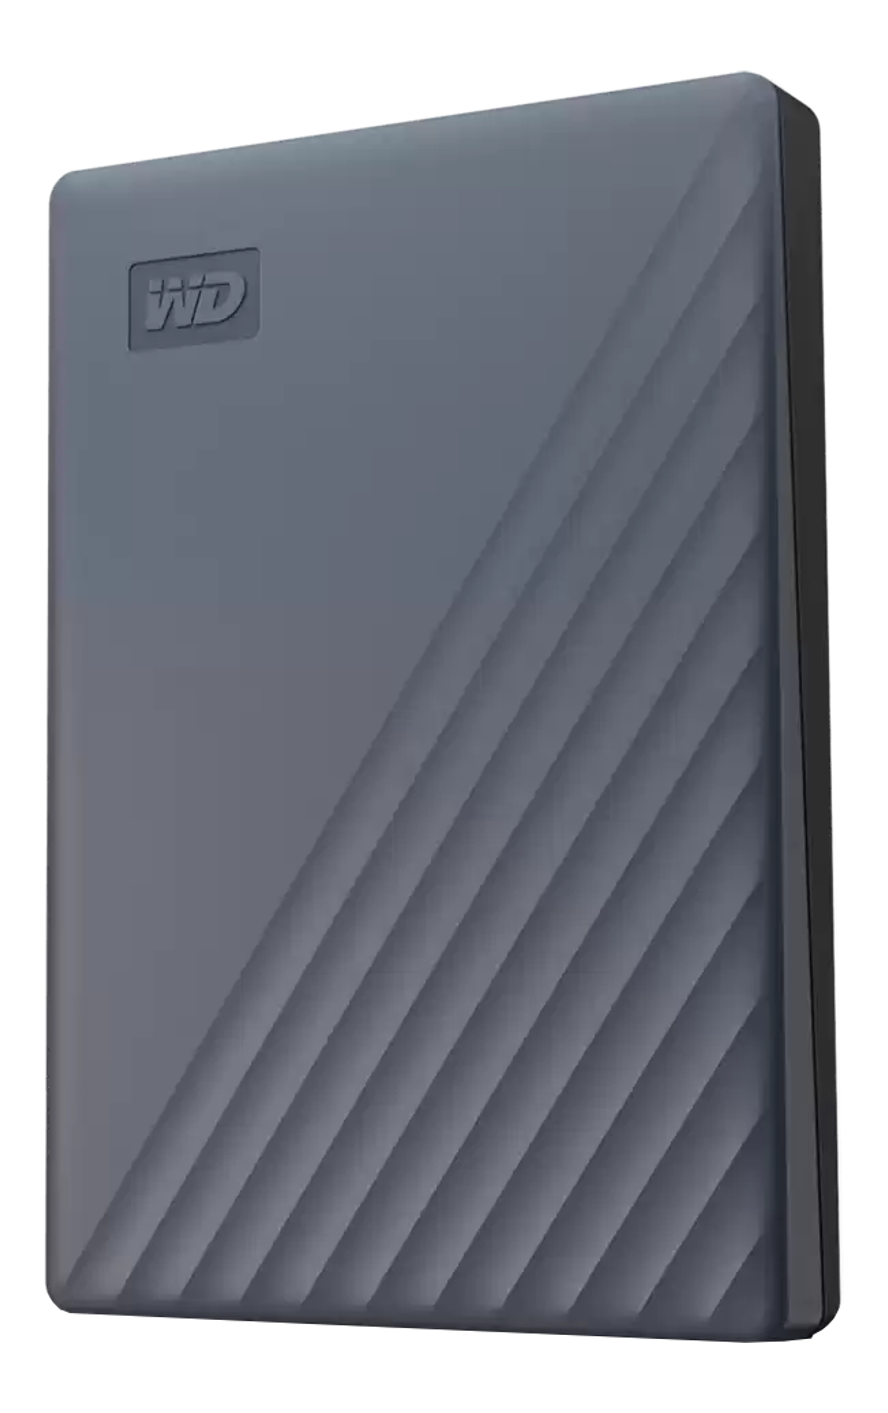 WESTERN DIGITAL WD My Passport - Disque dur (HDD, 4 To, gris)